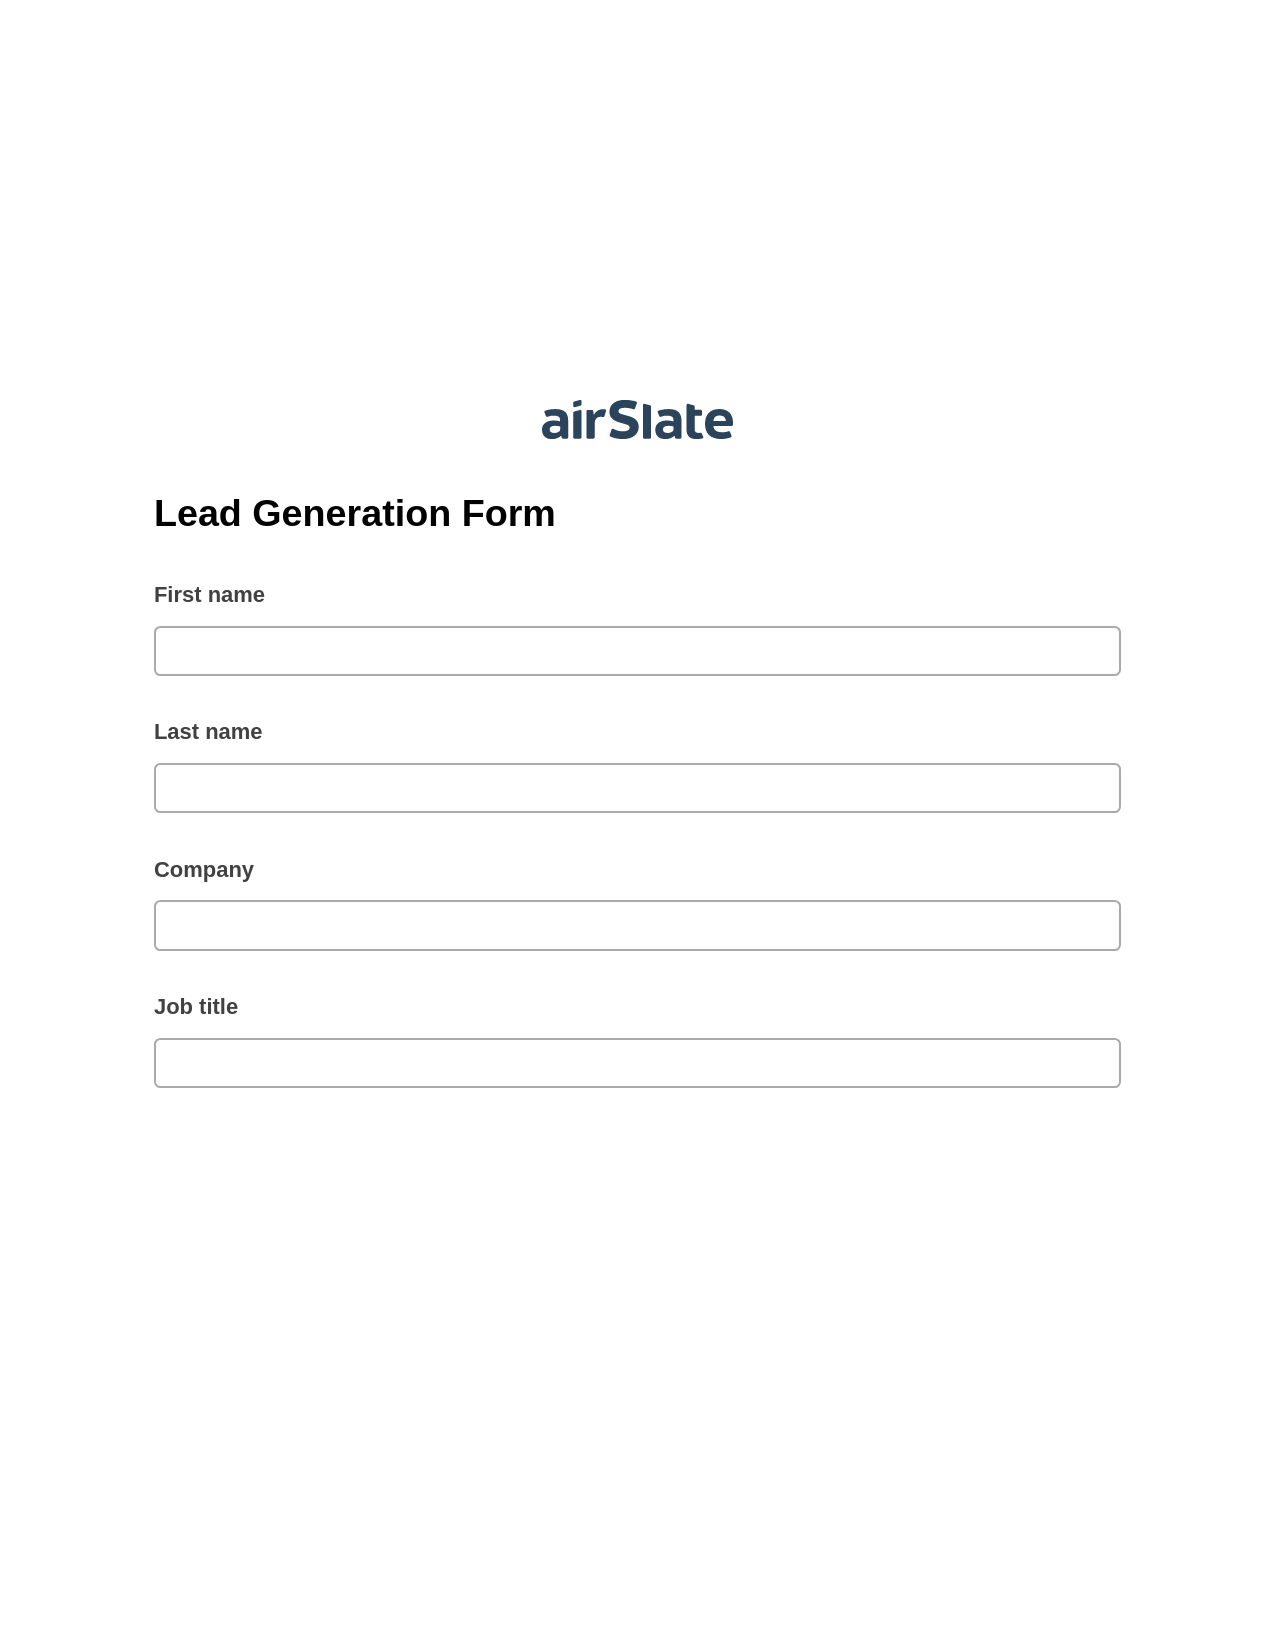 Lead Generation Form Pre-fill from another Slate Bot, Revoke Access Bot, Archive to SharePoint Folder Bot